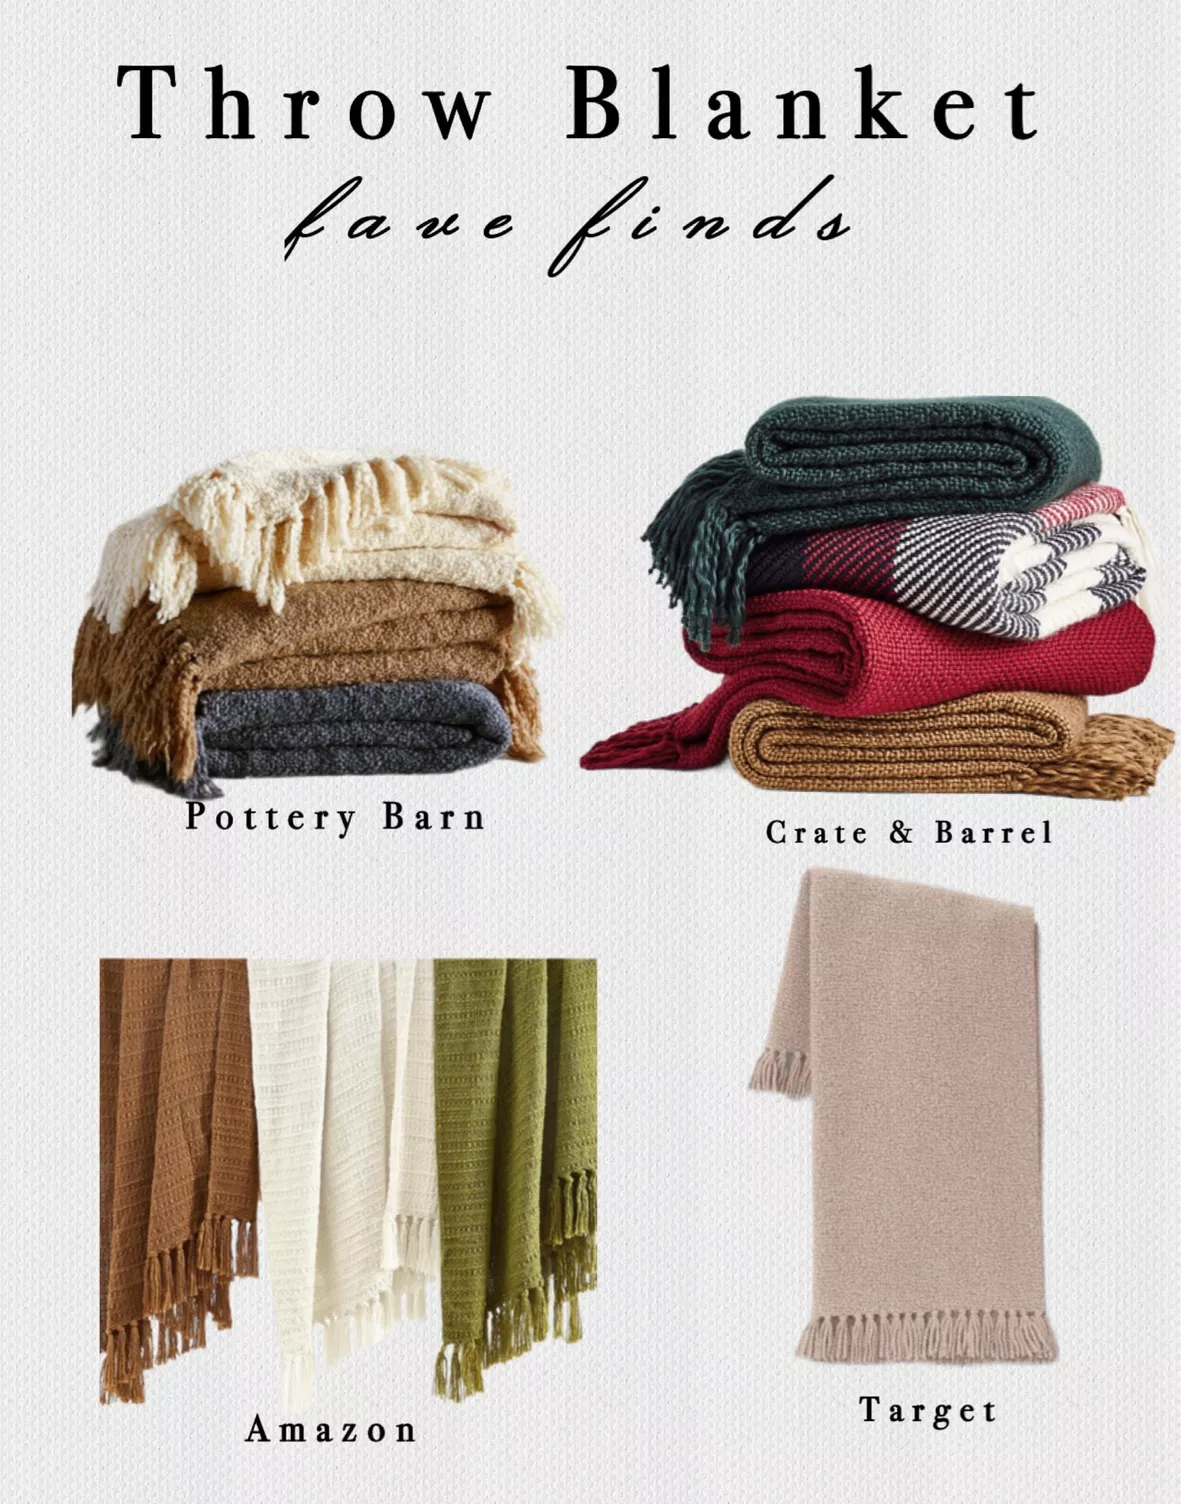 Dreamy Handwoven Fringe Throw curated on LTK